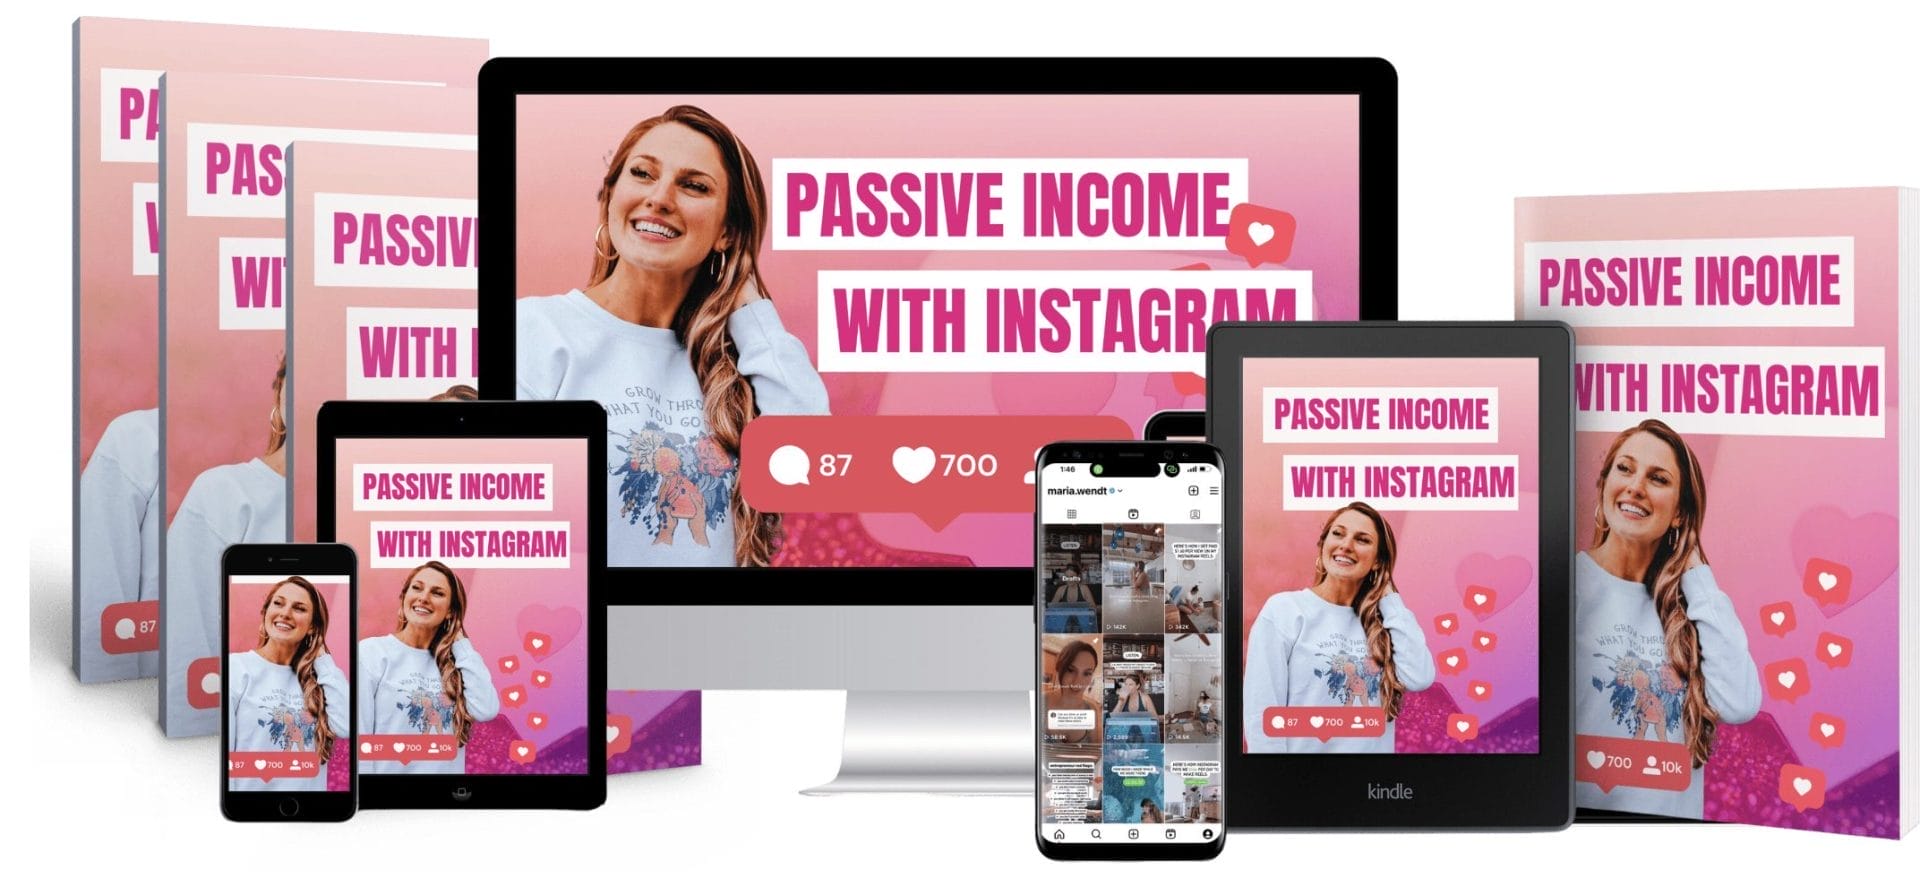 Maria Wendt – Passive Income Business With Instagram